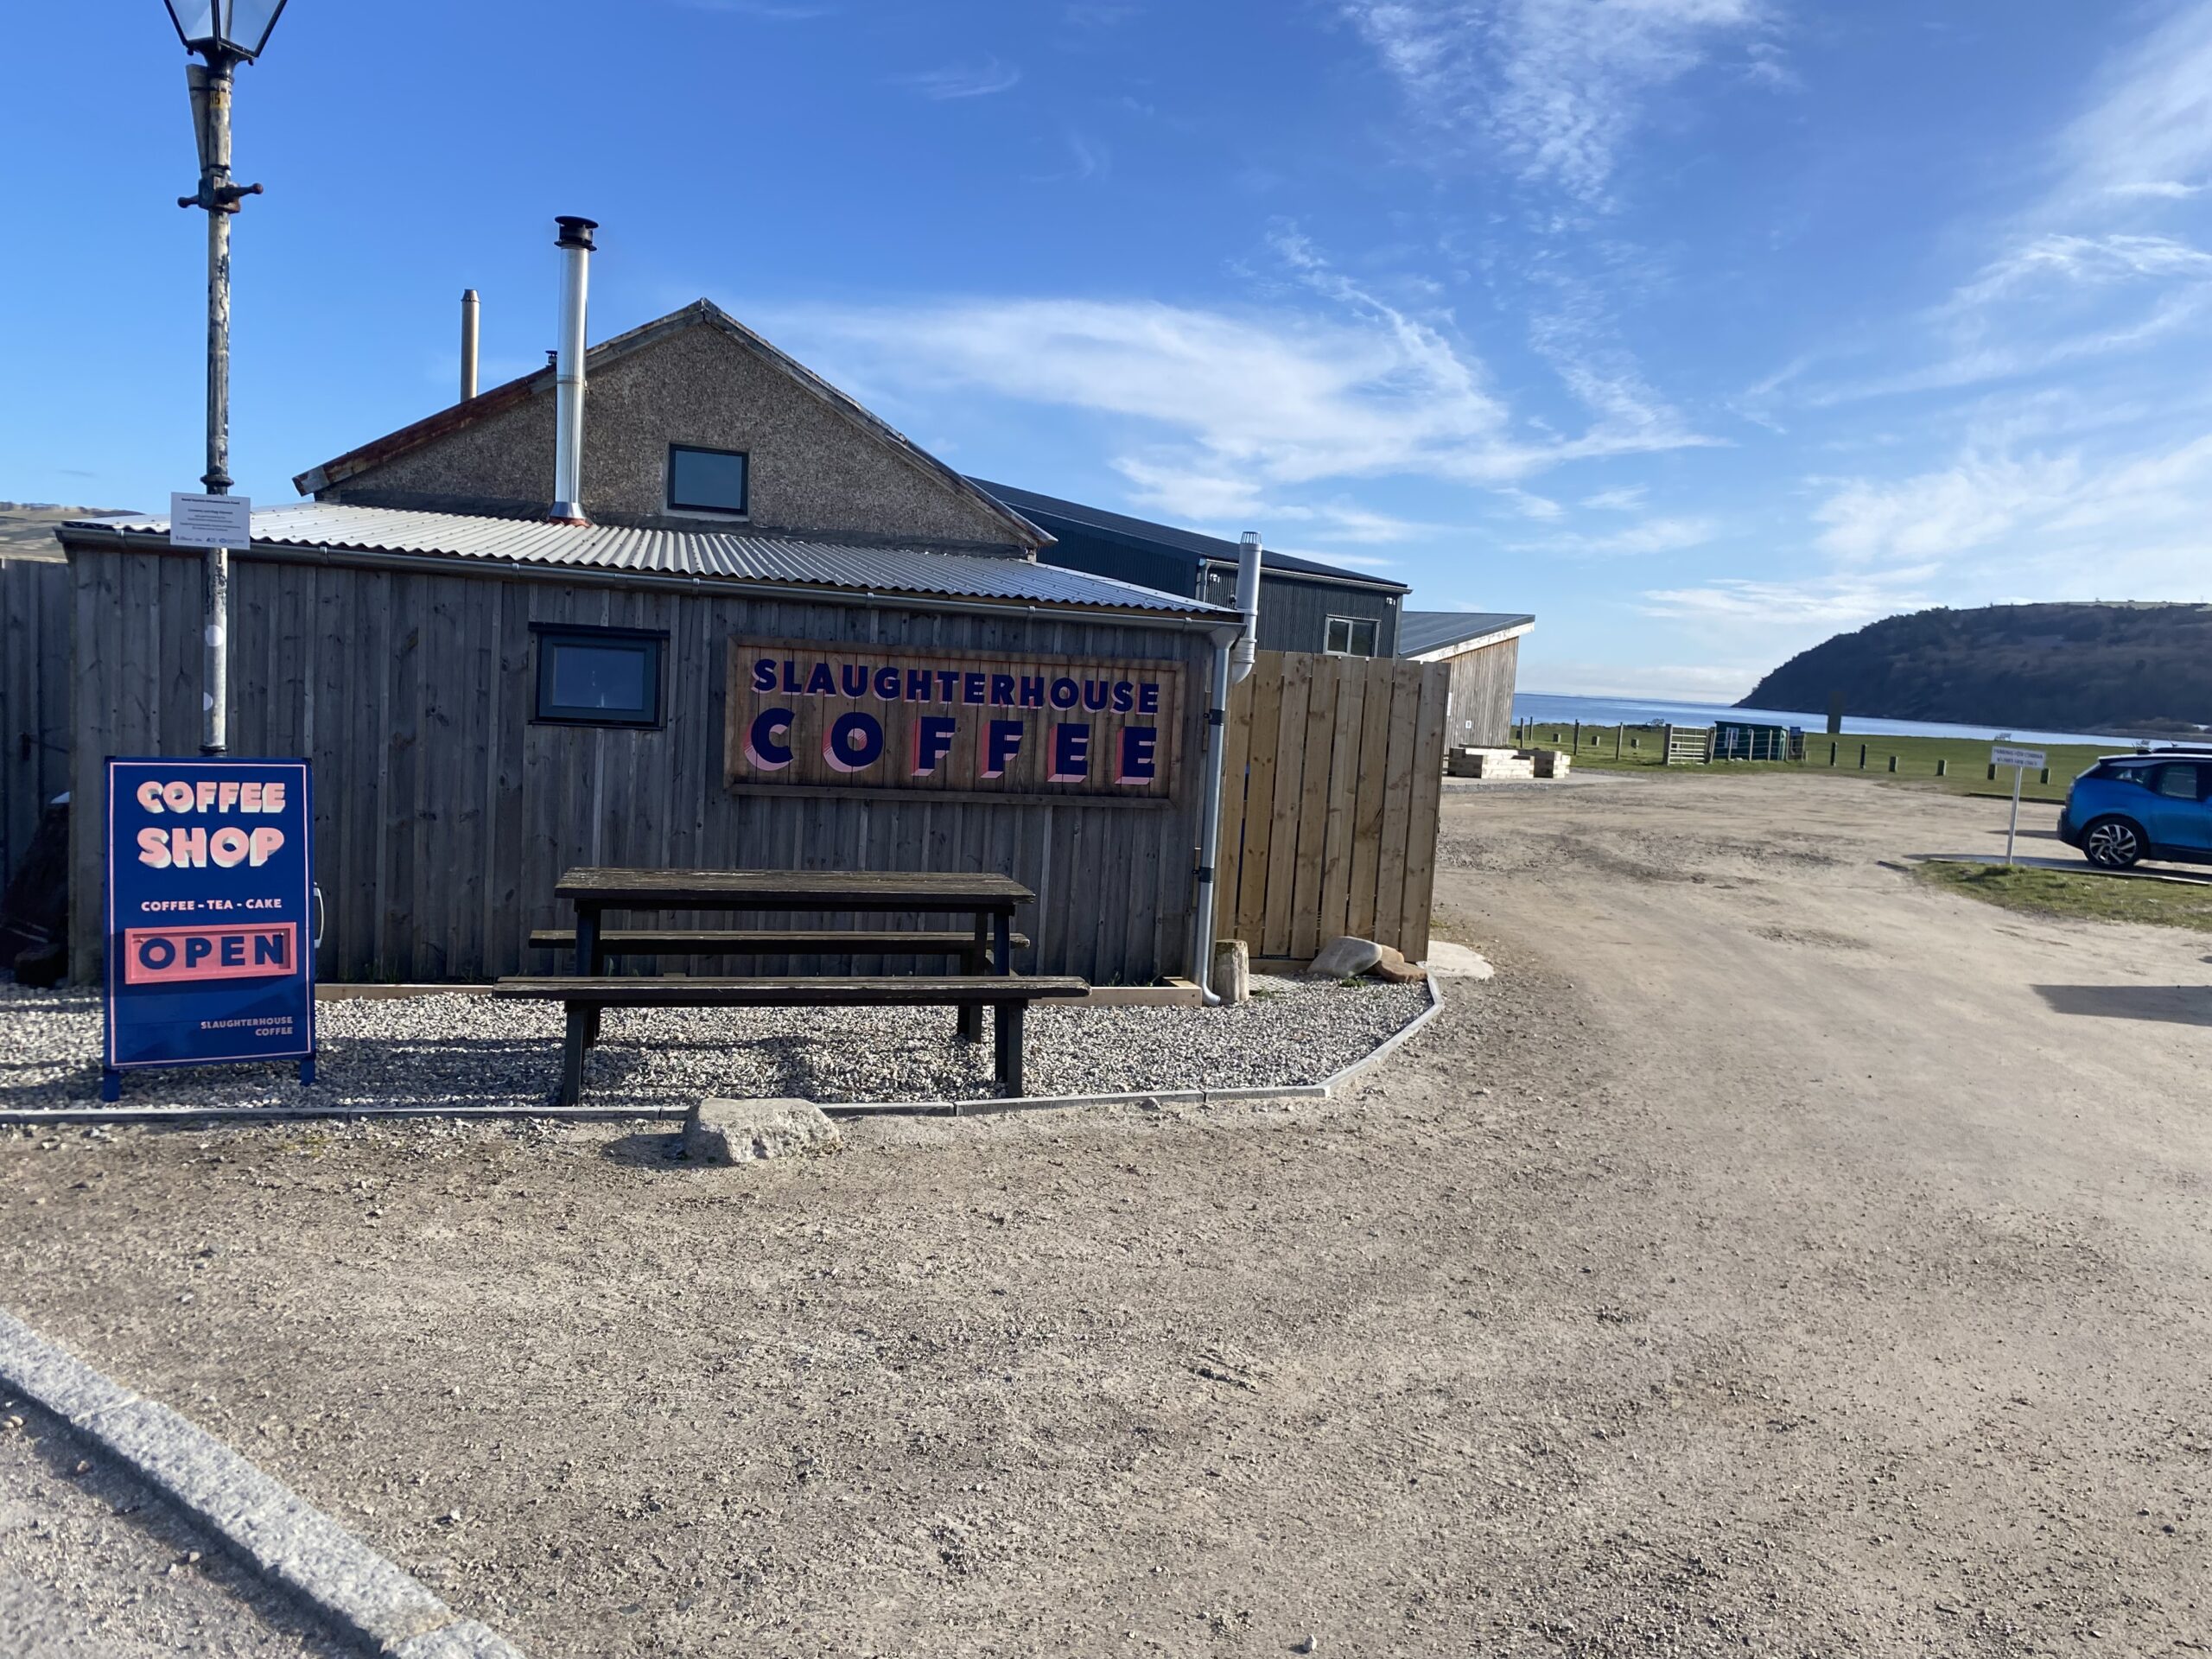 Slaughterhouse Coffee in Cromarty